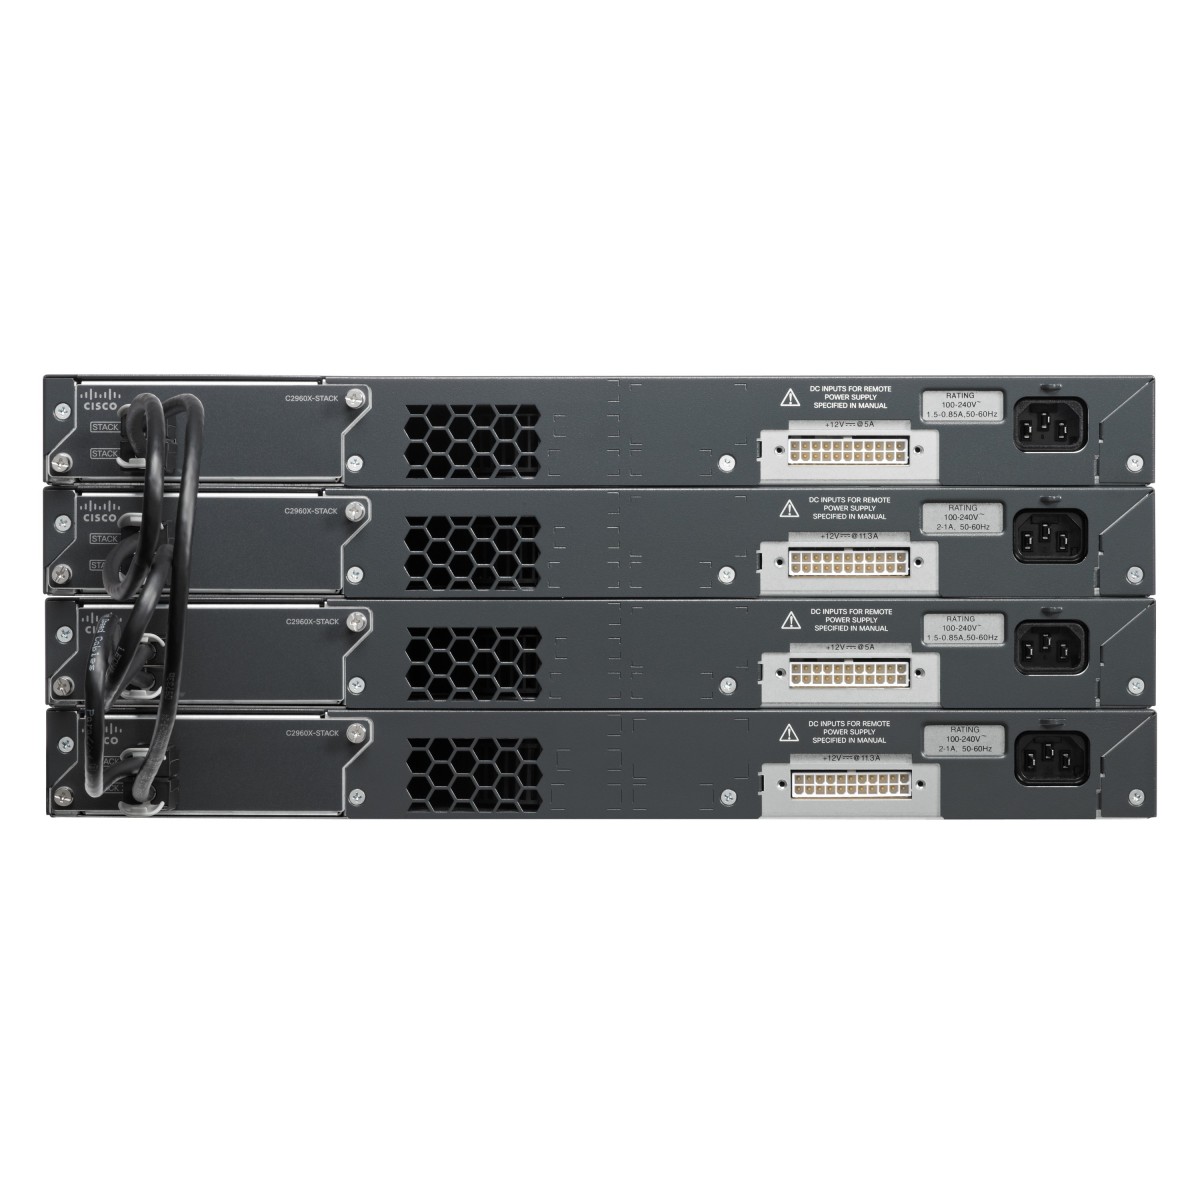 Cisco Catalyst 2960X-24TS-L 24 Ports Manageable Ethernet Switch - 2 Layer Supported - Twisted Pair - 1U High - Desktop, Rack-mou